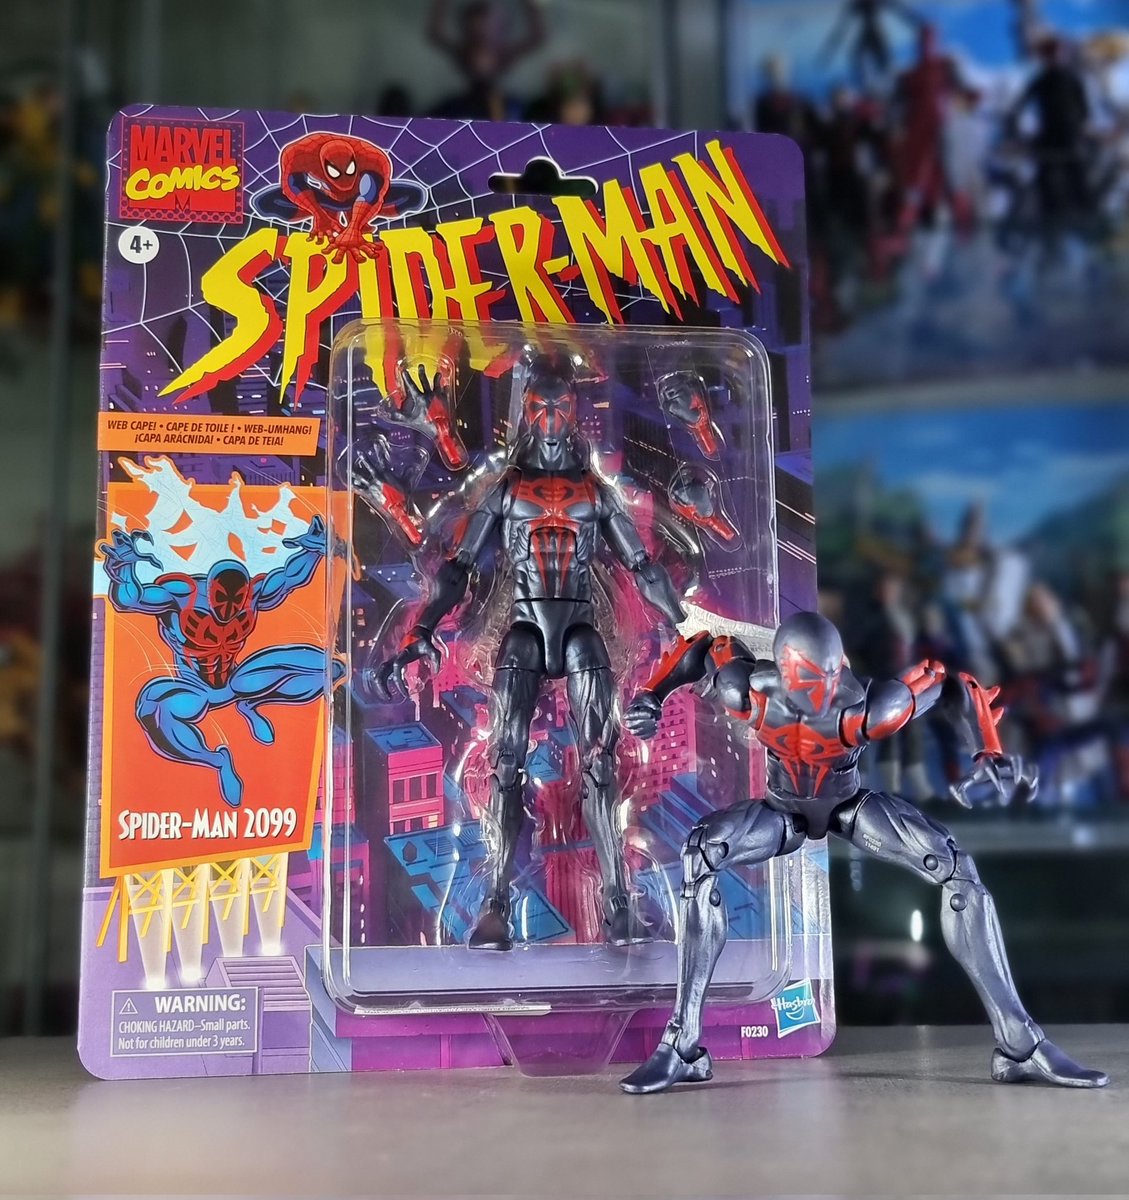 After that new #SpiderVerse trailer, no doubt Spider-Man 2099 is on your mind!

Luckily we have the Retro #MarvelLegends Spidey 2099 in stock for the Legends price of 2019: £19.99! Grab him before secondary market prices send him into the extortionate Legends prices of 2099! https://t.co/6yE6yoDhBd